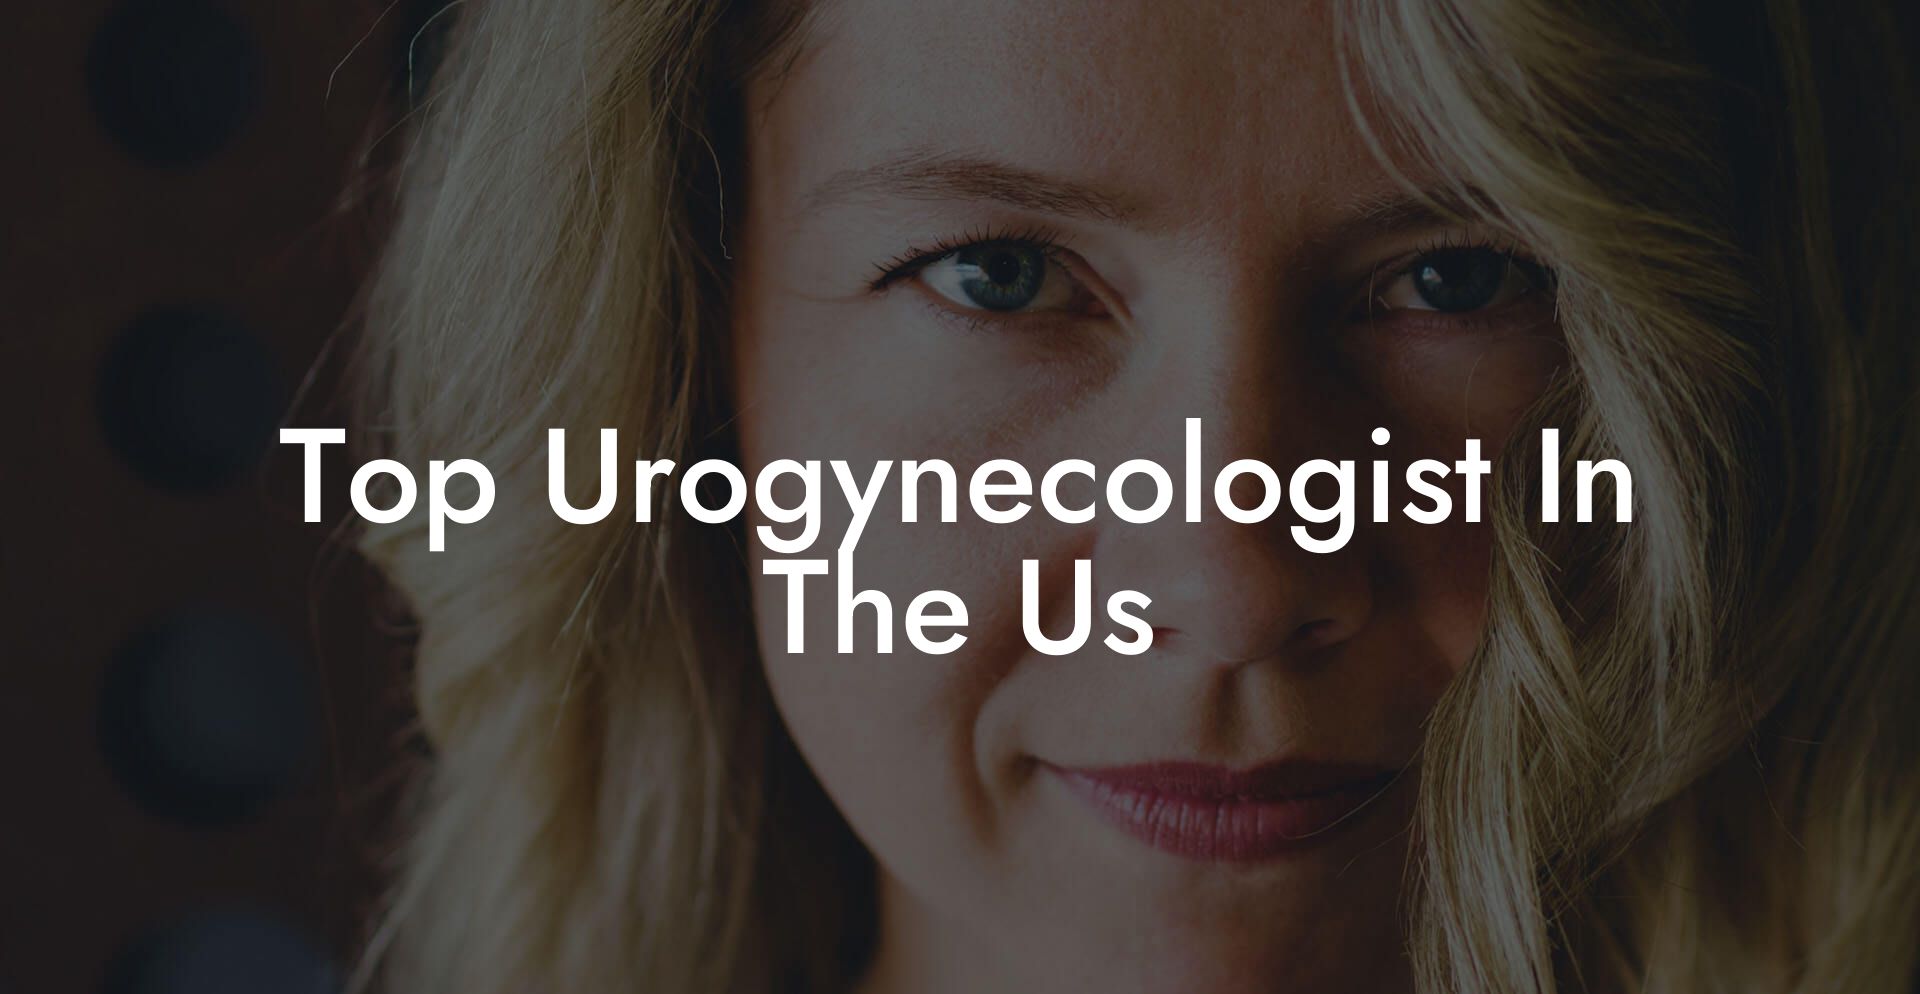 Top Urogynecologist In The Us